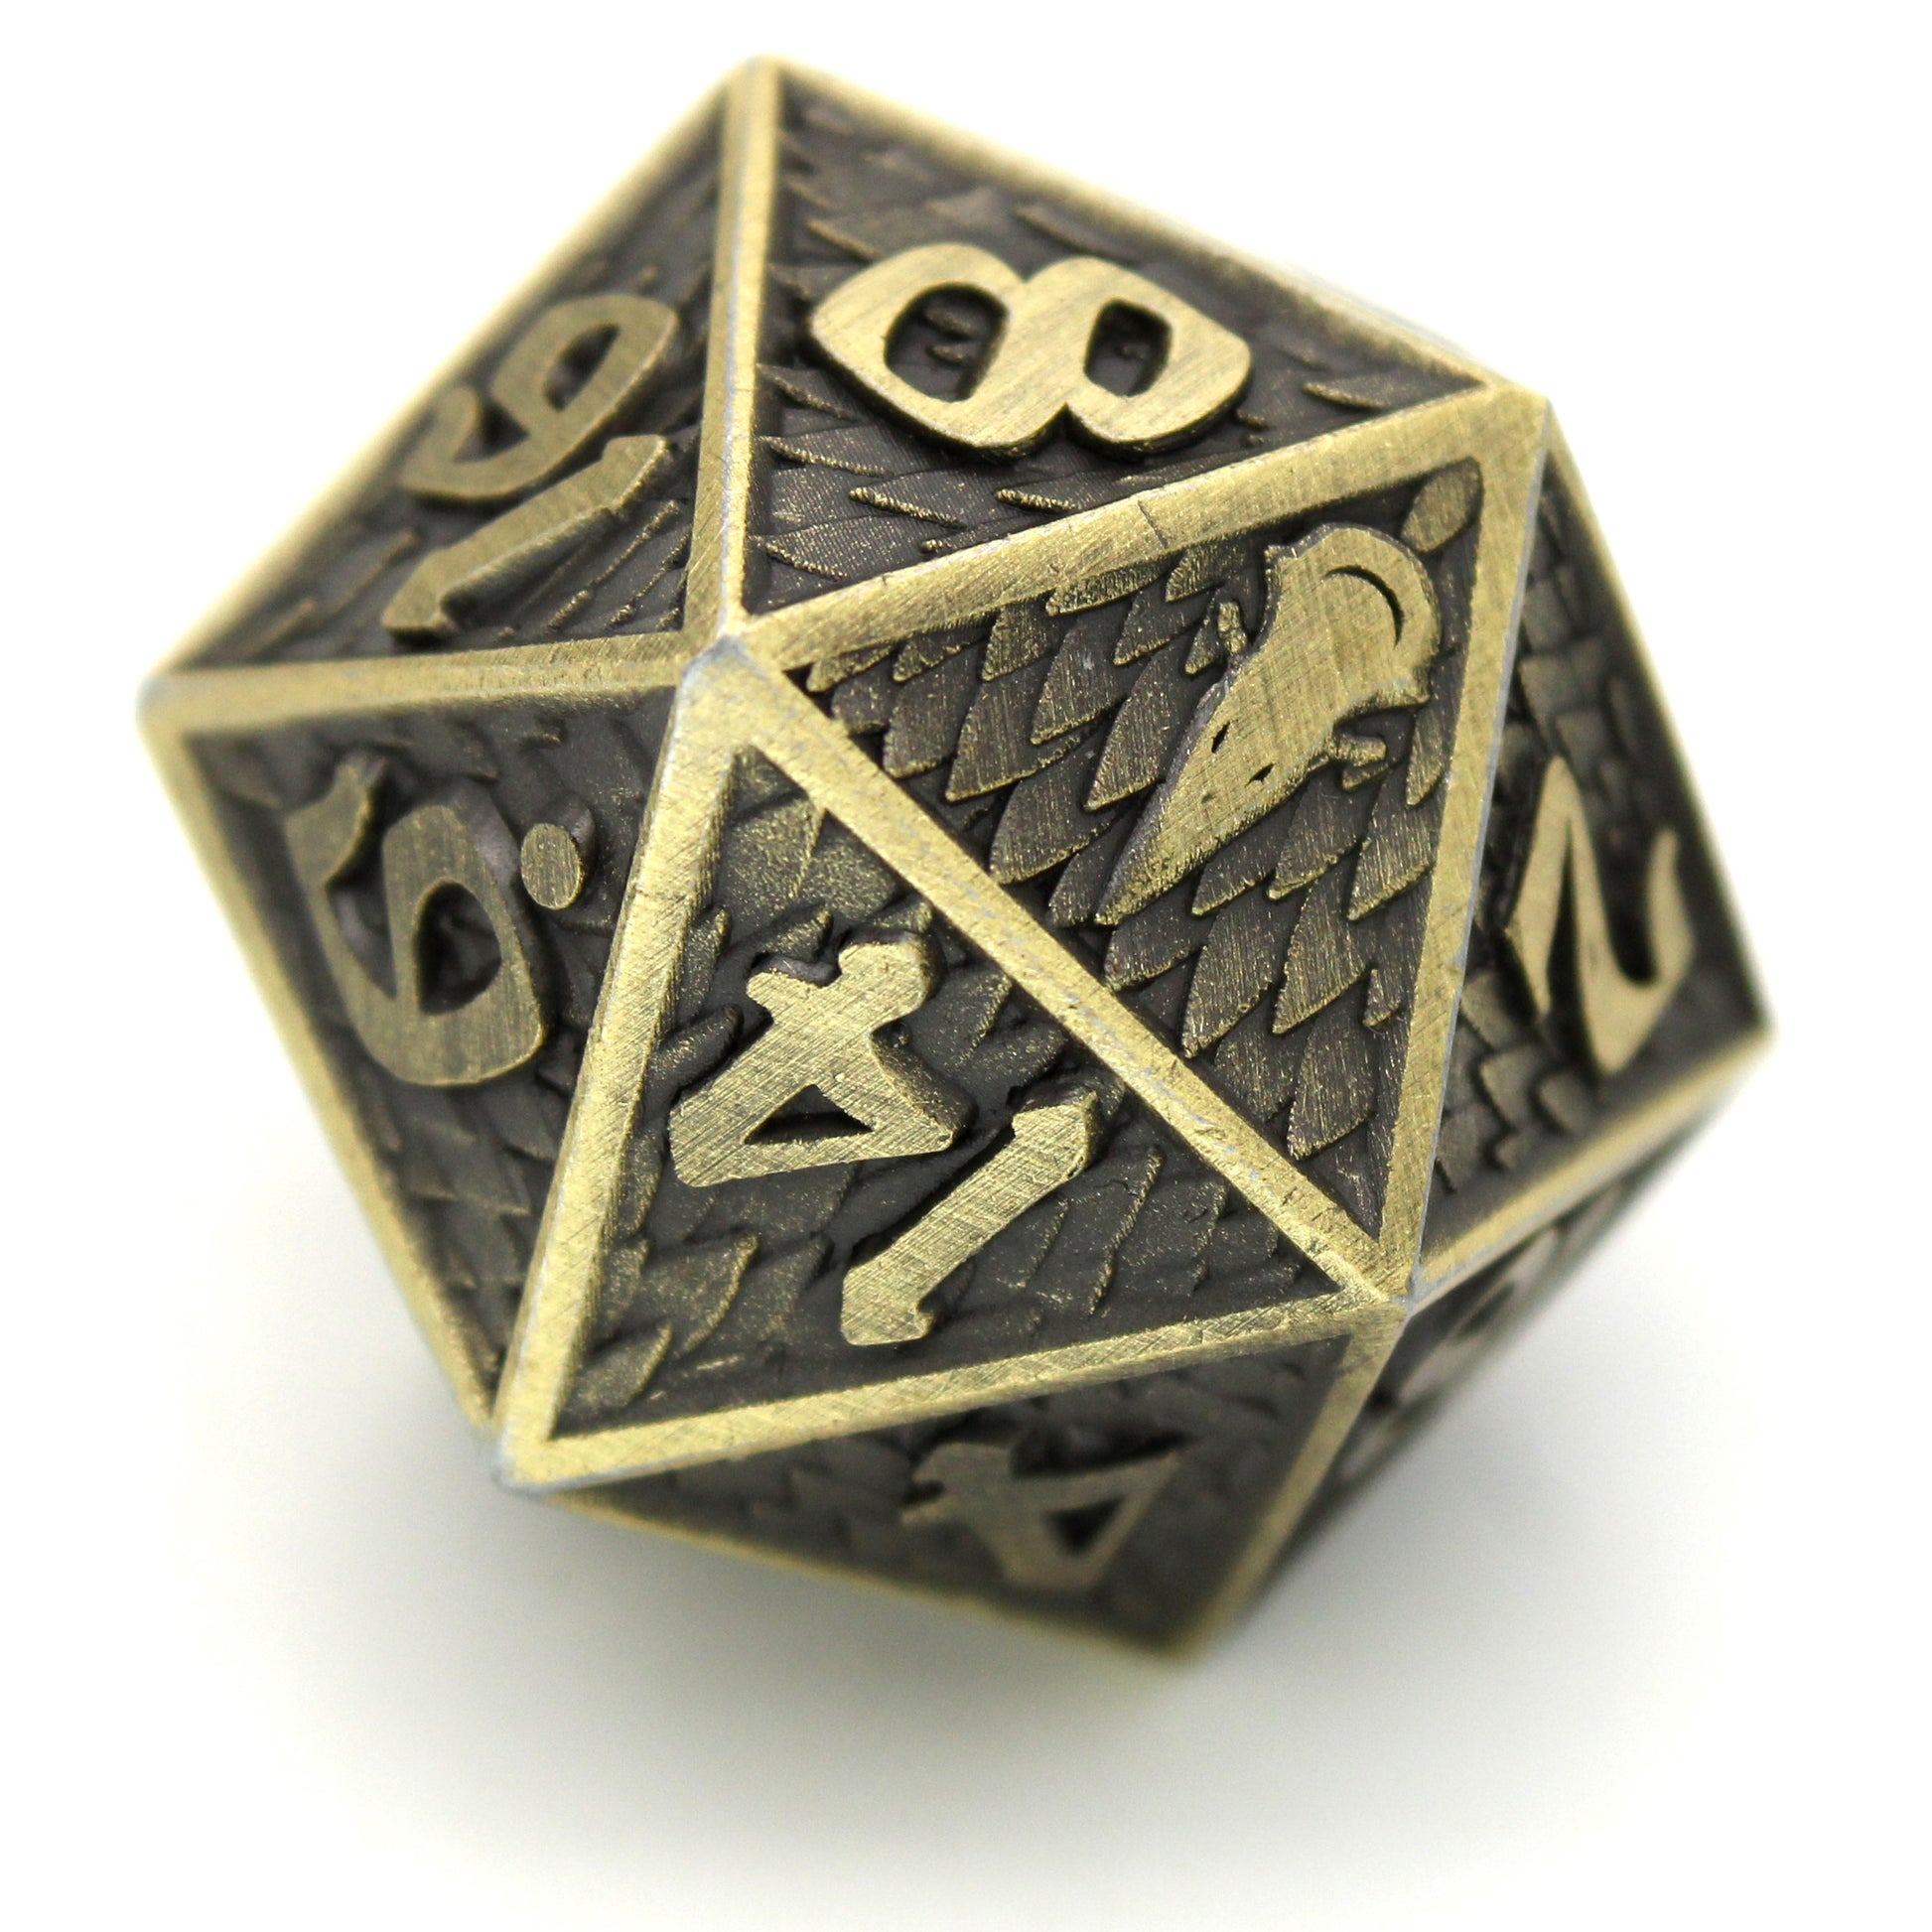 Champion is an 8-piece Dice Envy exclusive set of bronze metal dice in our Raven Queen mold.